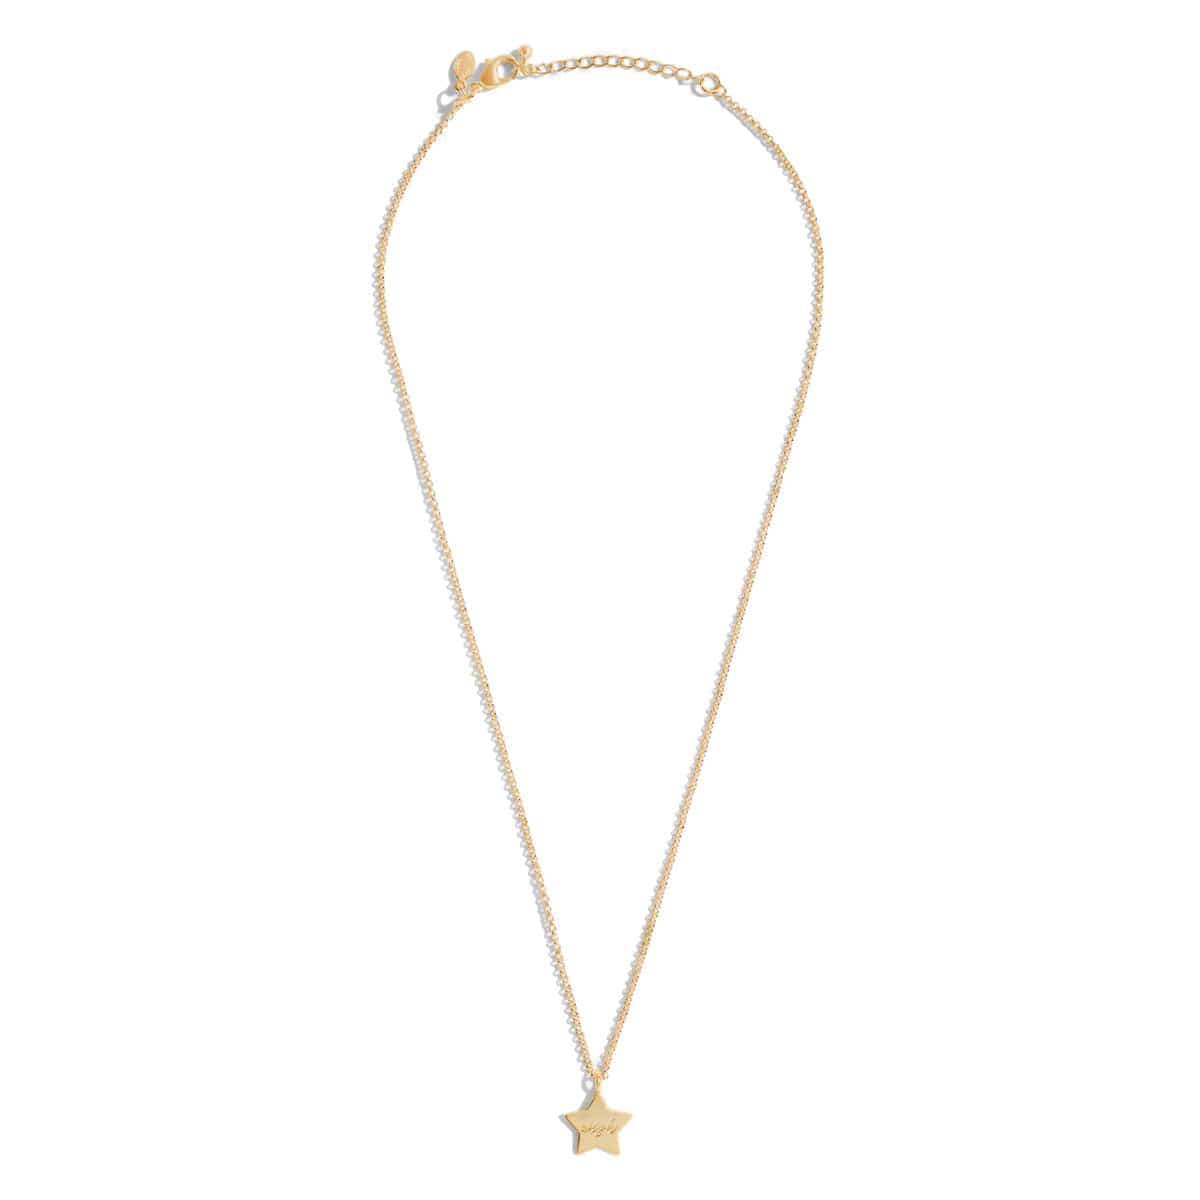 Joma Jewellery Necklace Joma Jewellery Gold Necklace - Sending You Christmas Wishes